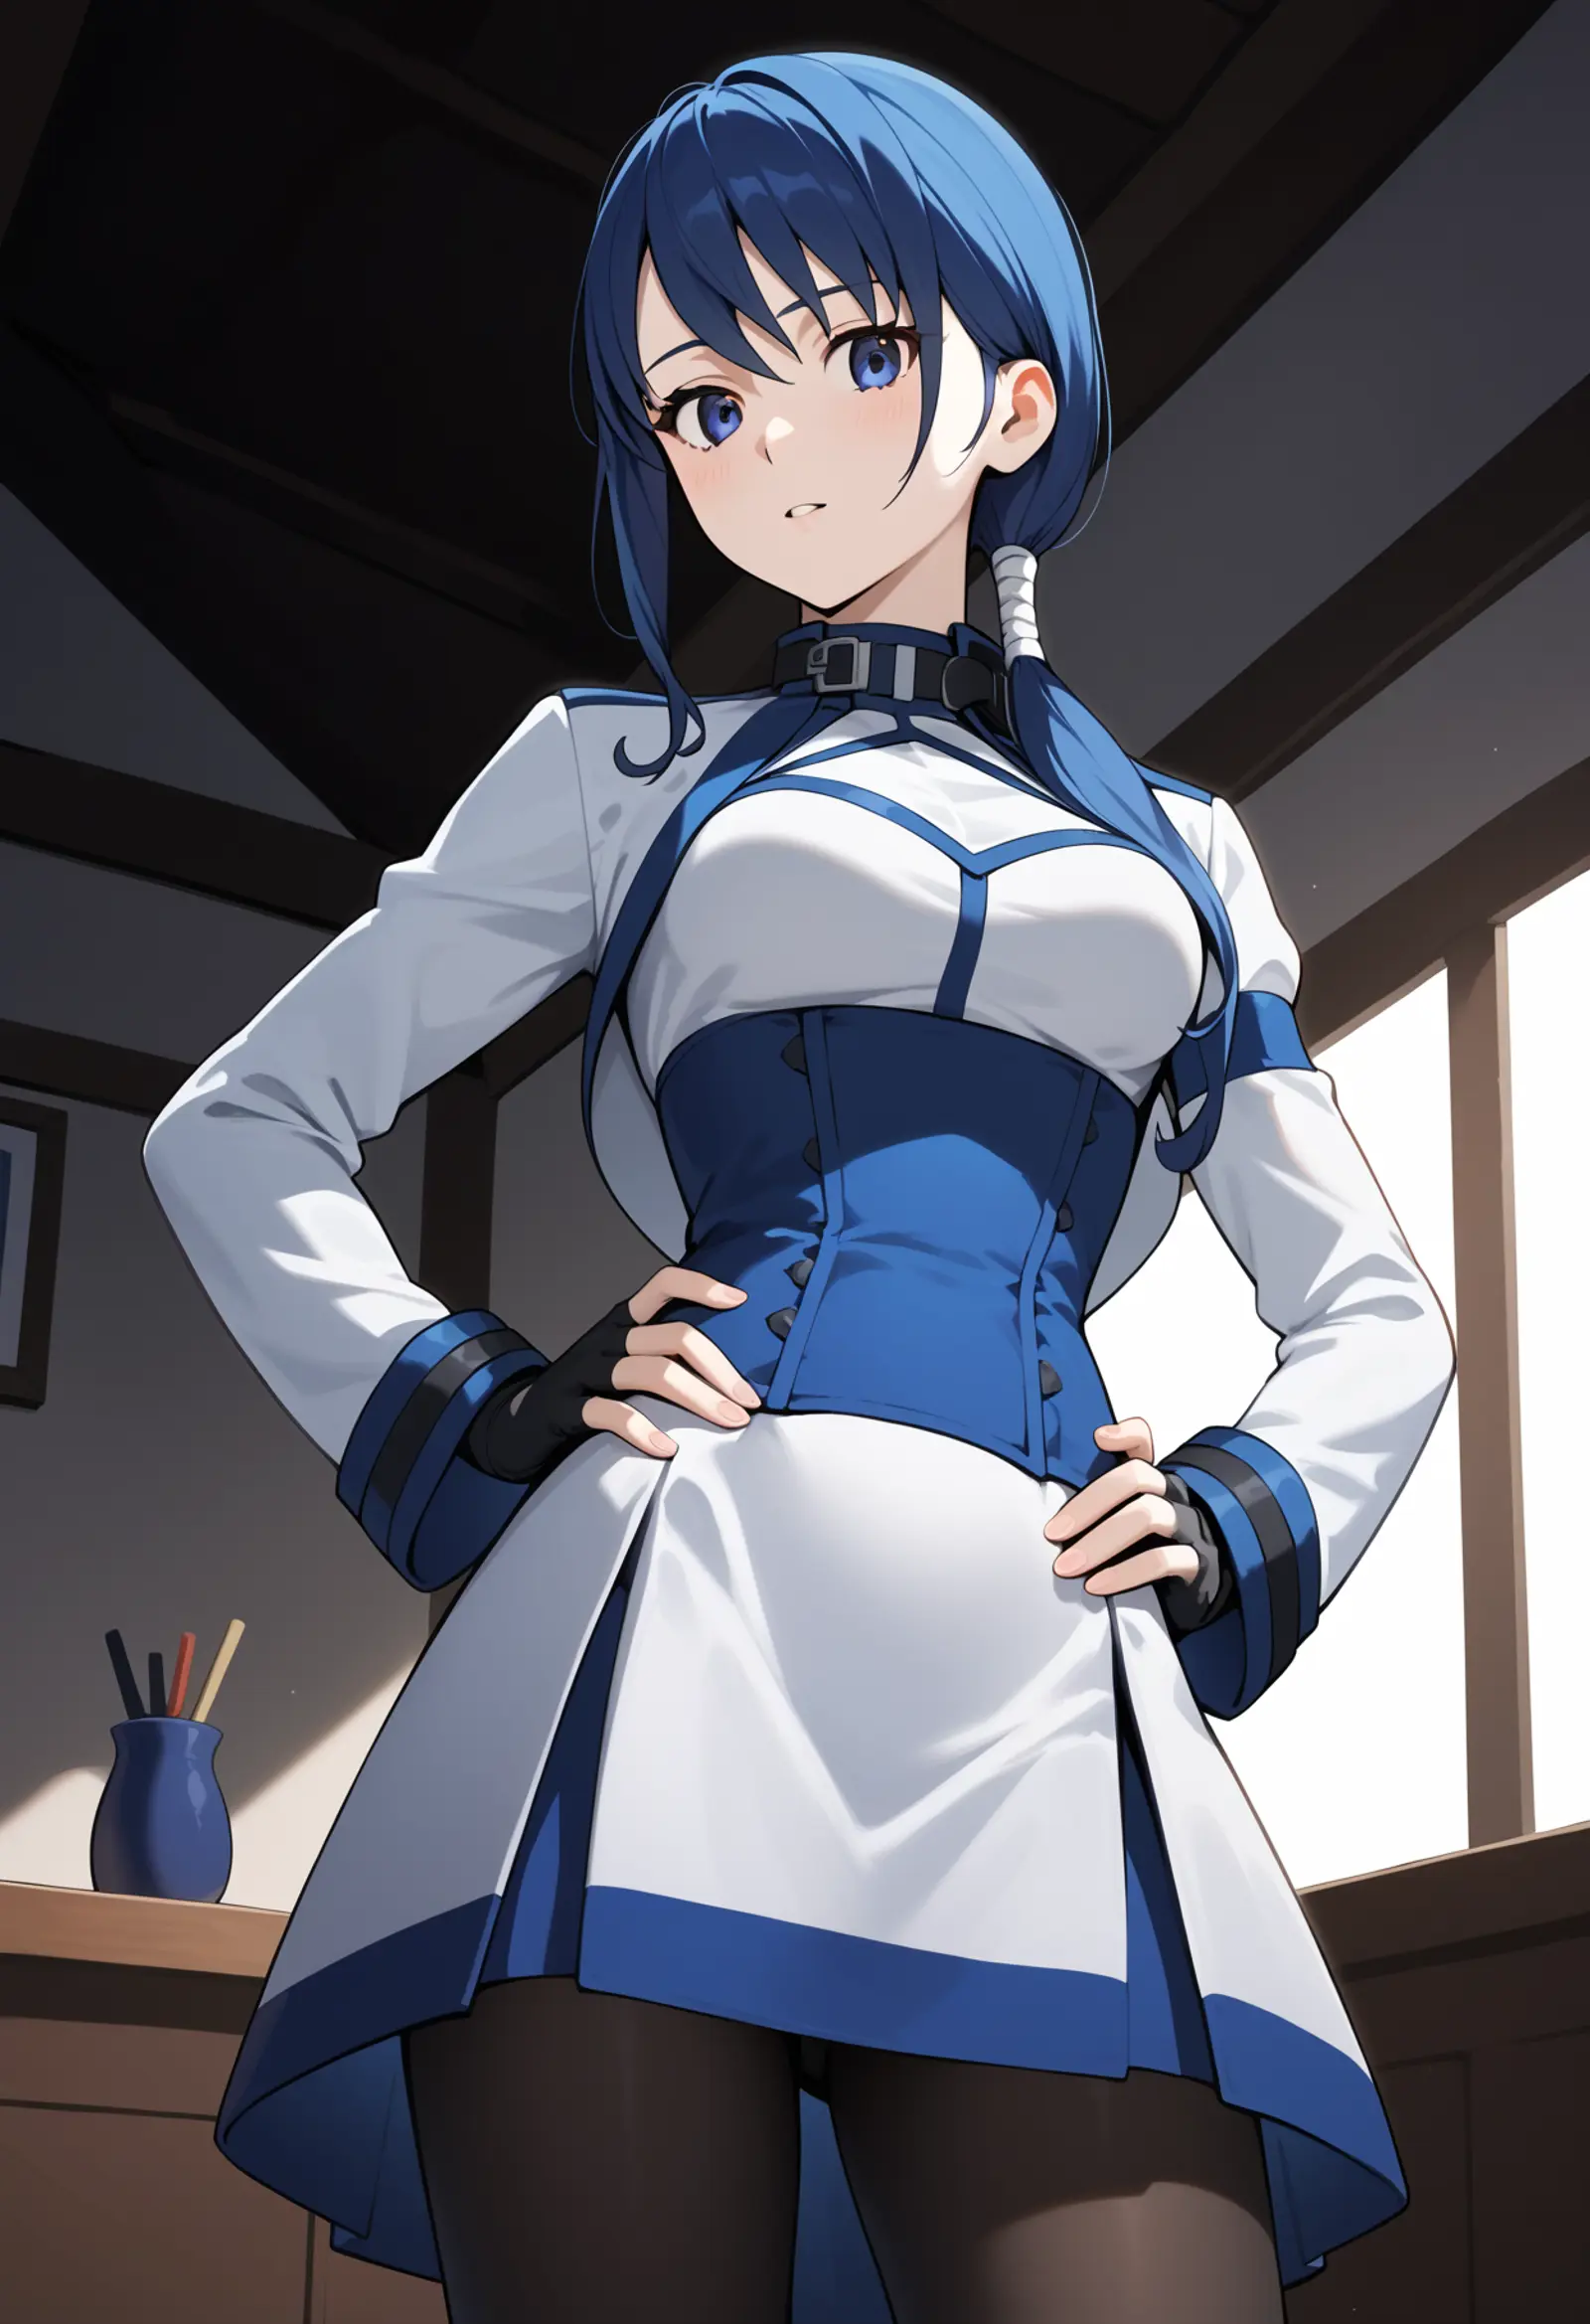 A young woman with blue hair dressed in a blue and white outfit standing confidently with her hands on her hips. The setting is a room with a window with natural light illuminating the scene. 